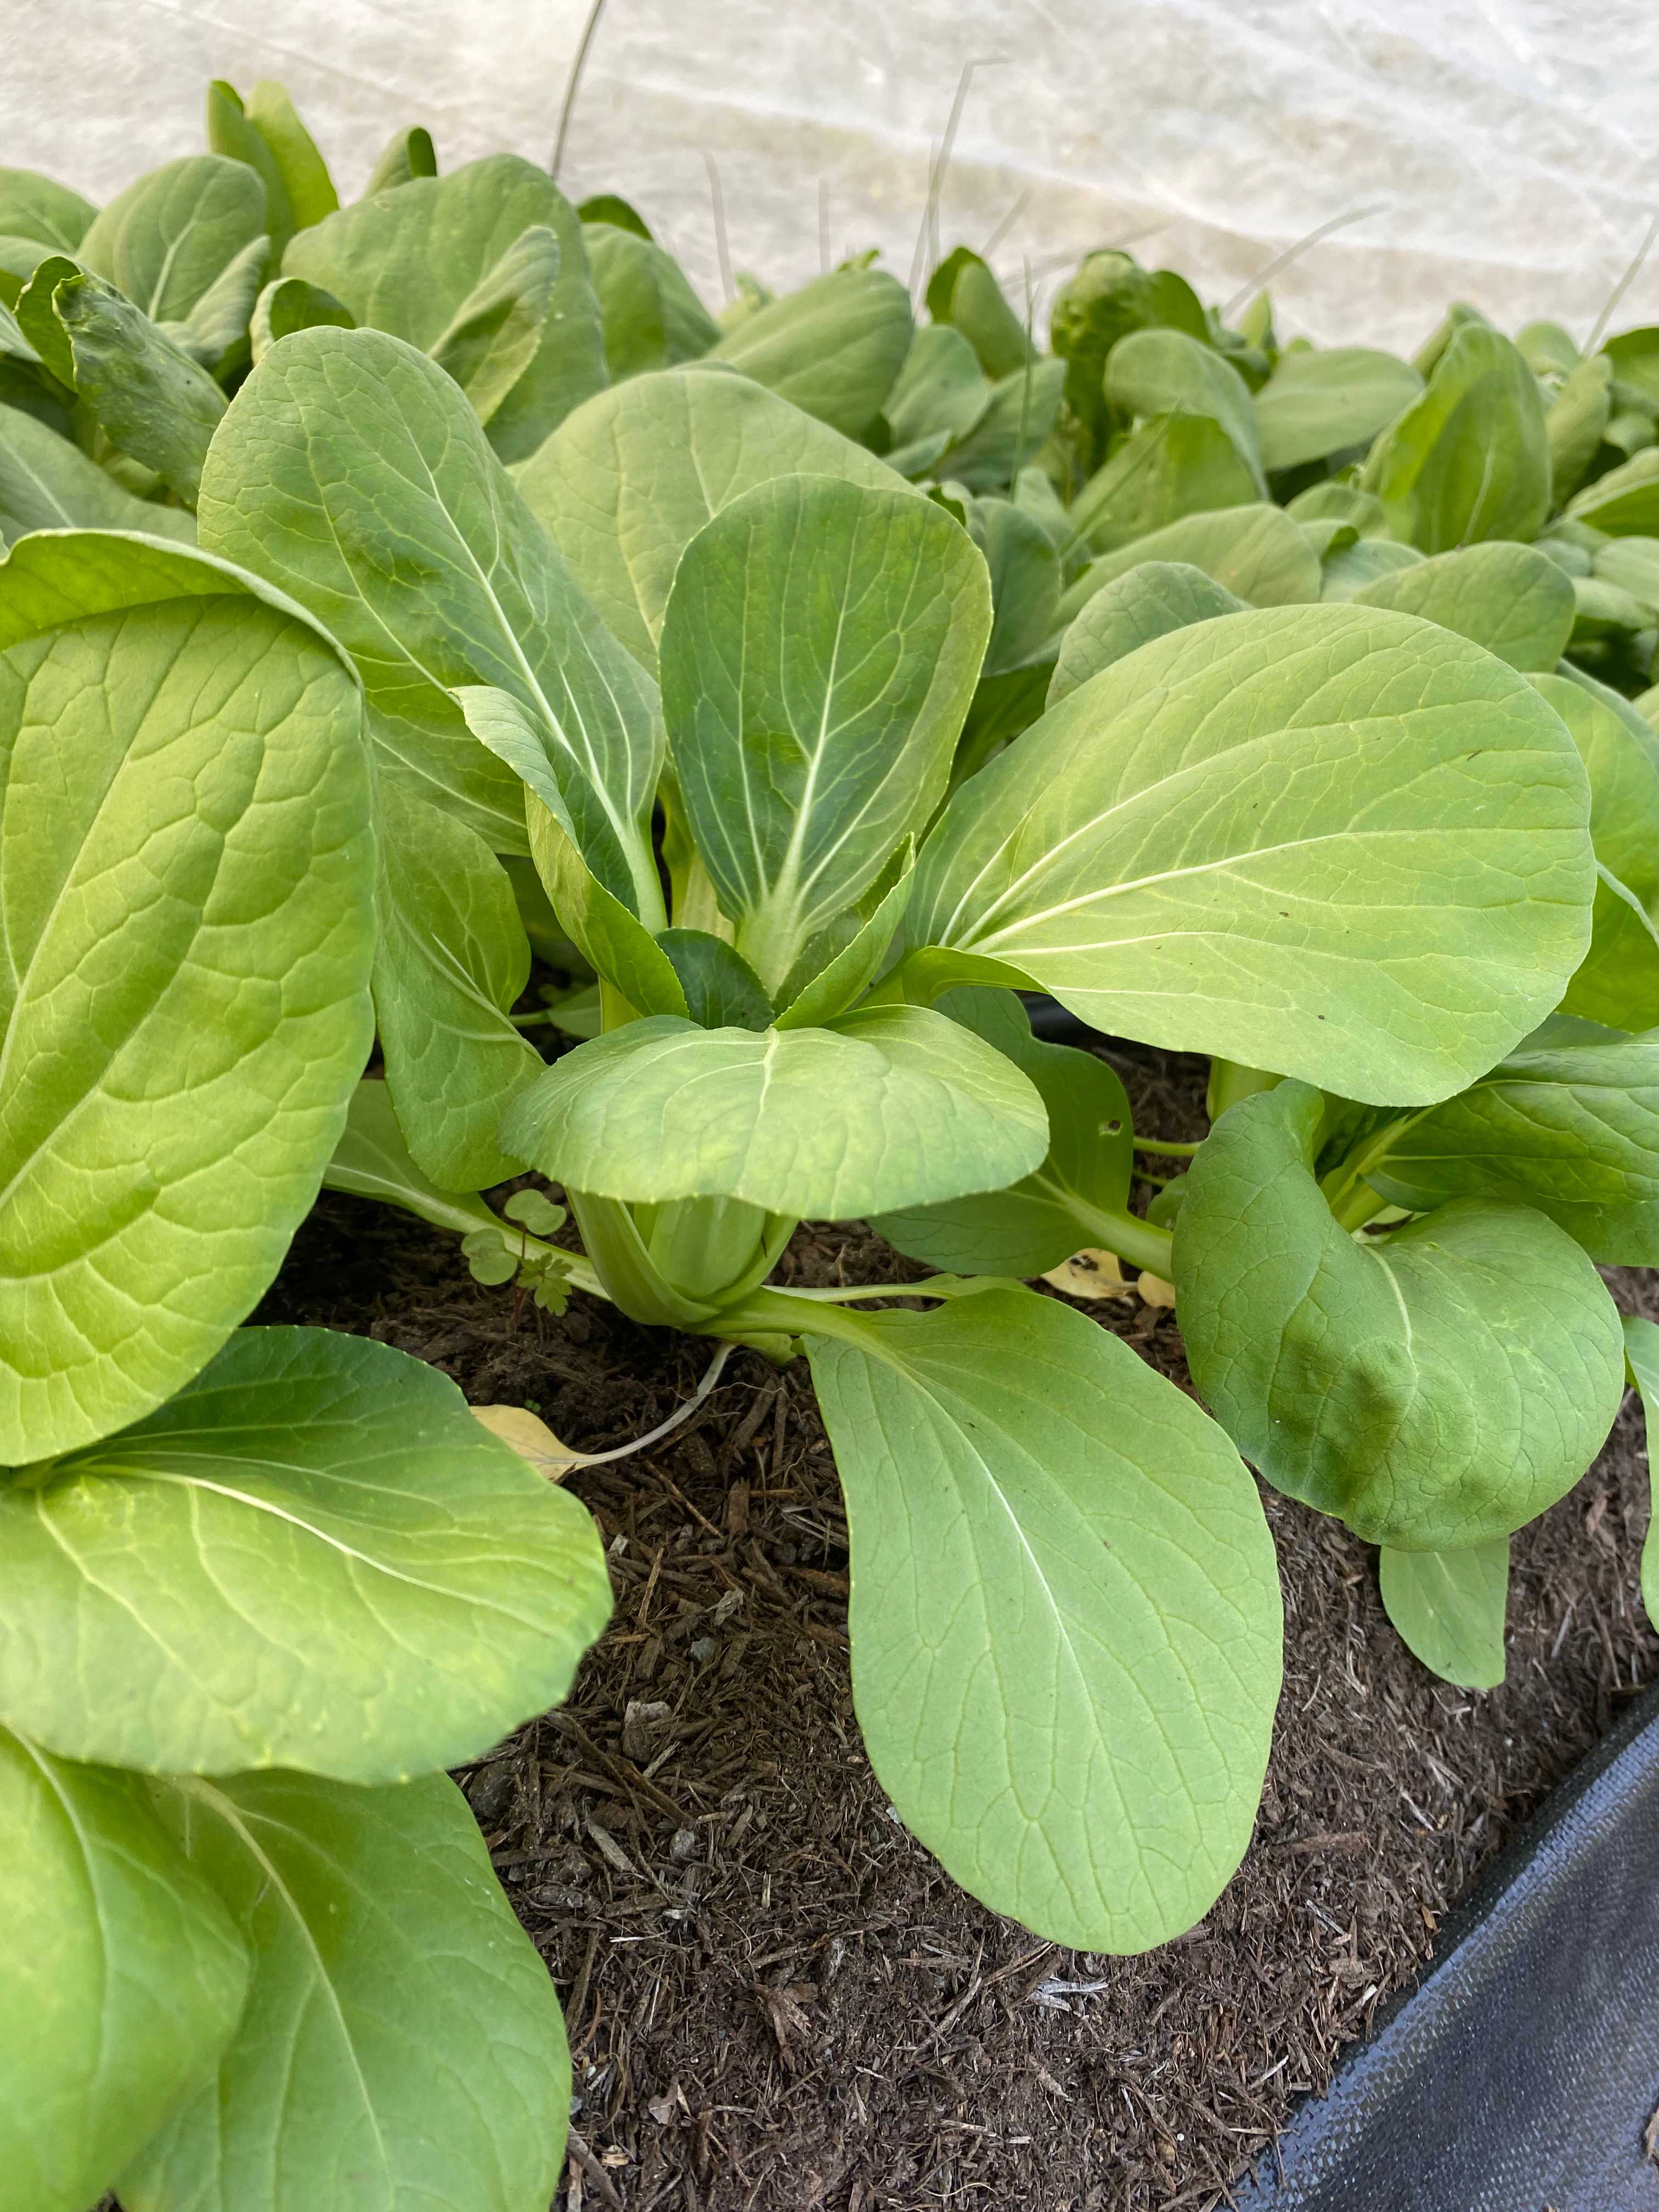 A picture of Pak Choi - Shanghai Green